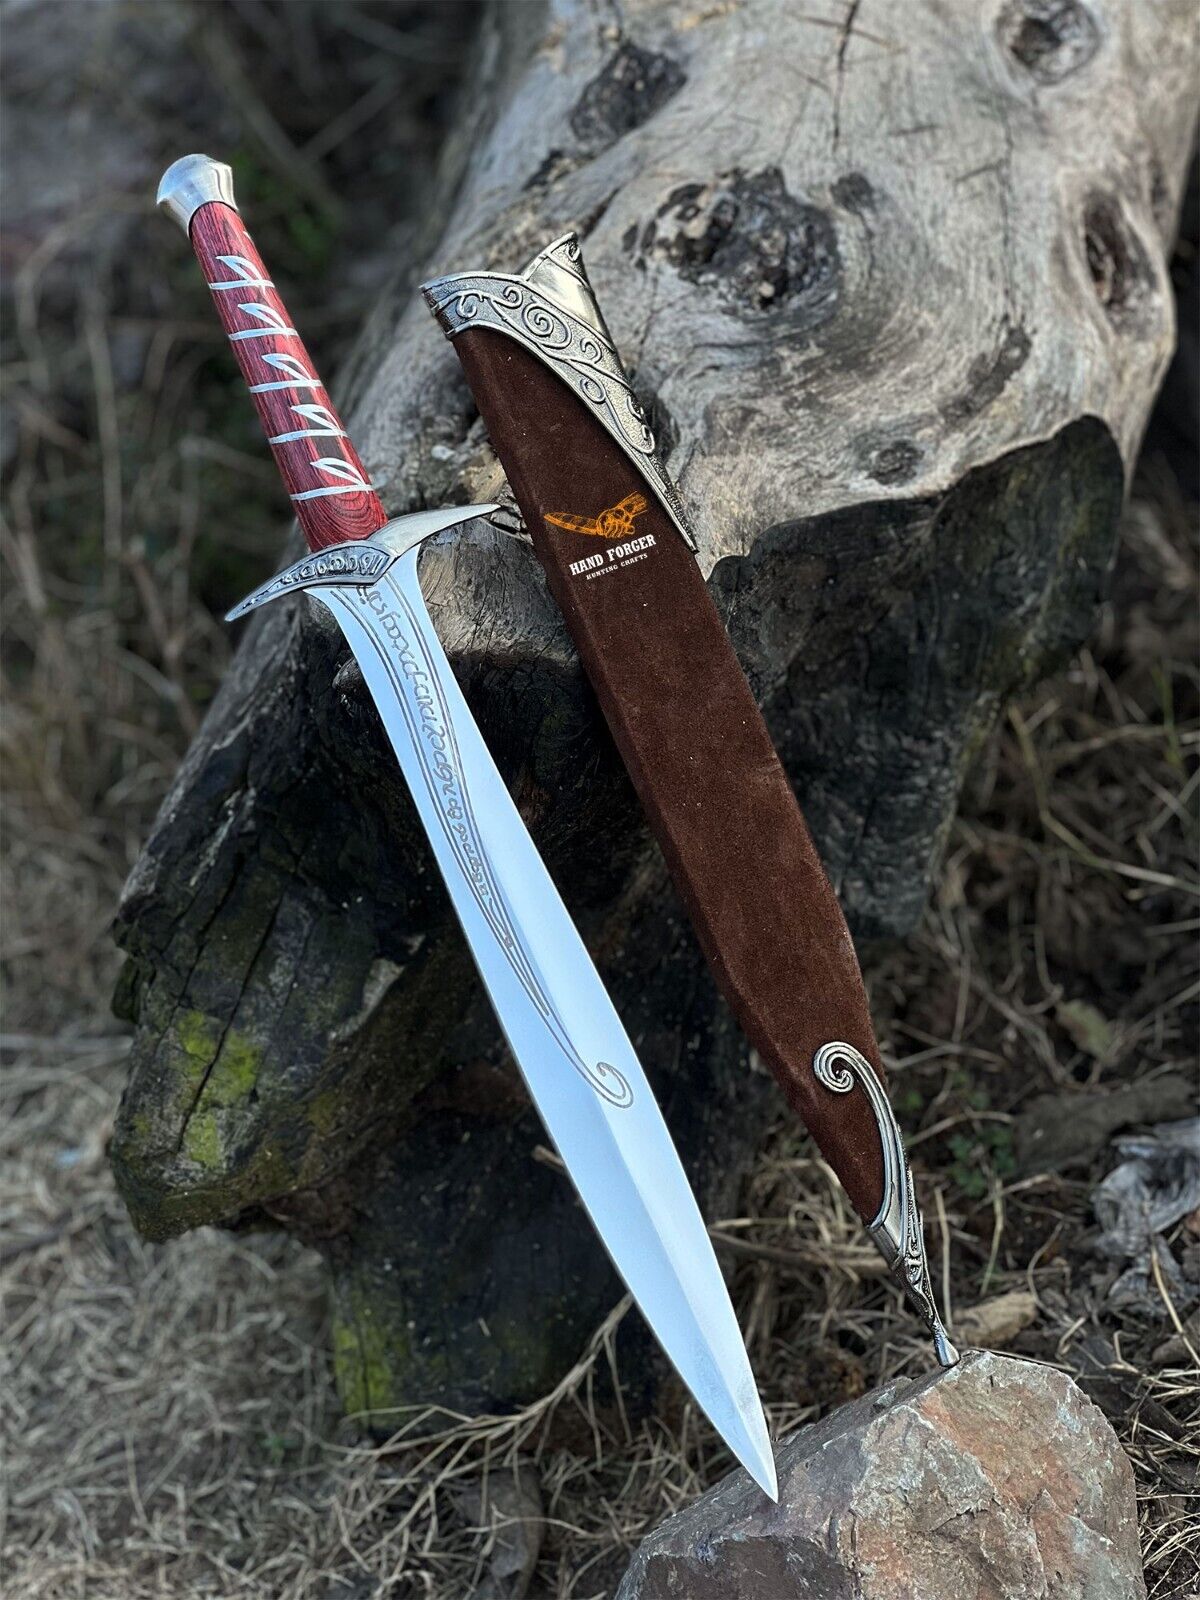 Handmade Hobbit Sting Sword Replica from Lord of the Rings (LOTR) With Scabbard